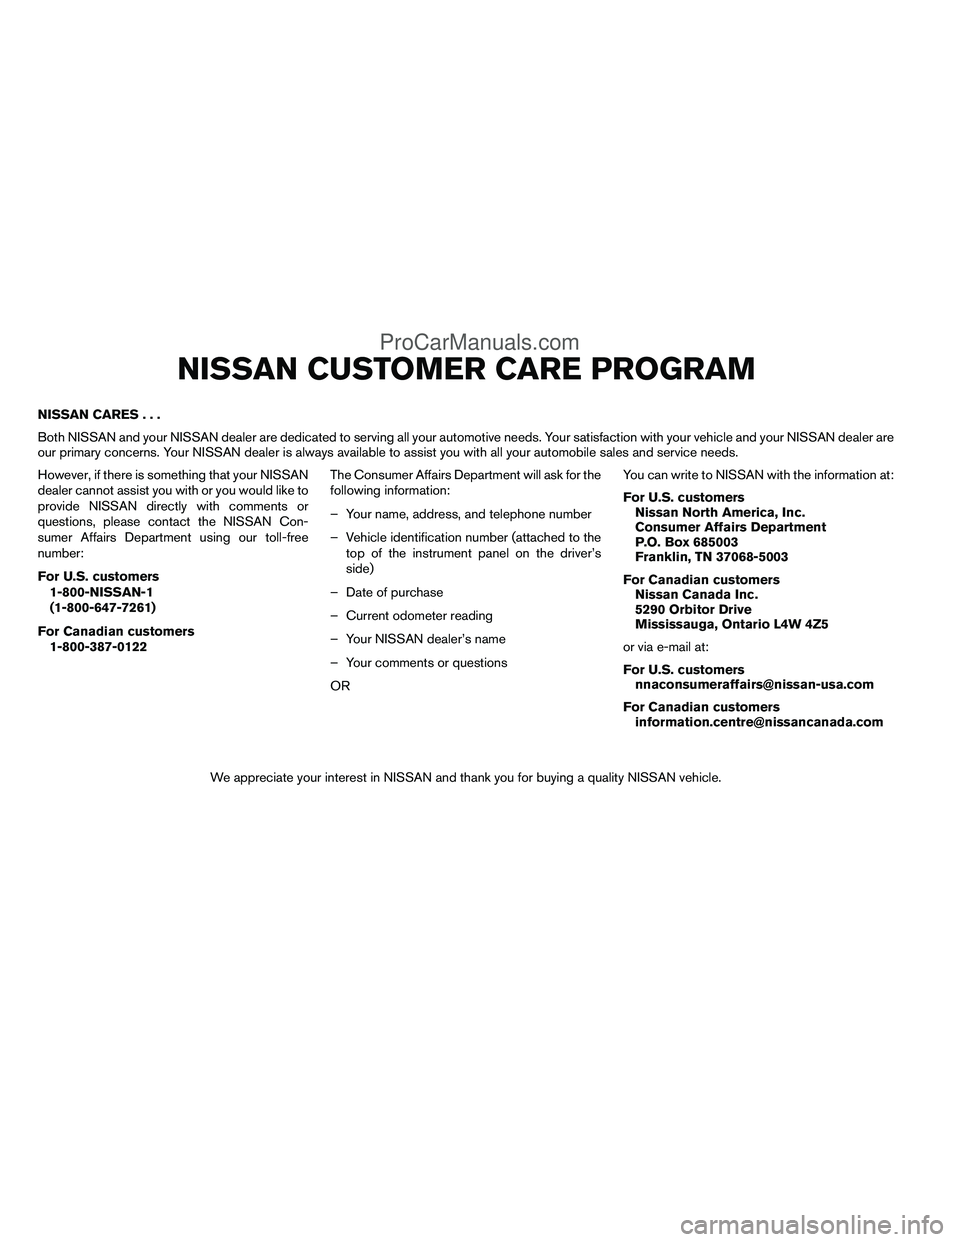 NISSAN TITAN 2012  Owners Manual NISSAN CARES...
Both NISSAN and your NISSAN dealer are dedicated to serving all your automotive needs. Your satisfaction with your vehicle and your NISSAN dealer are
our primary concerns. Your NISSAN 